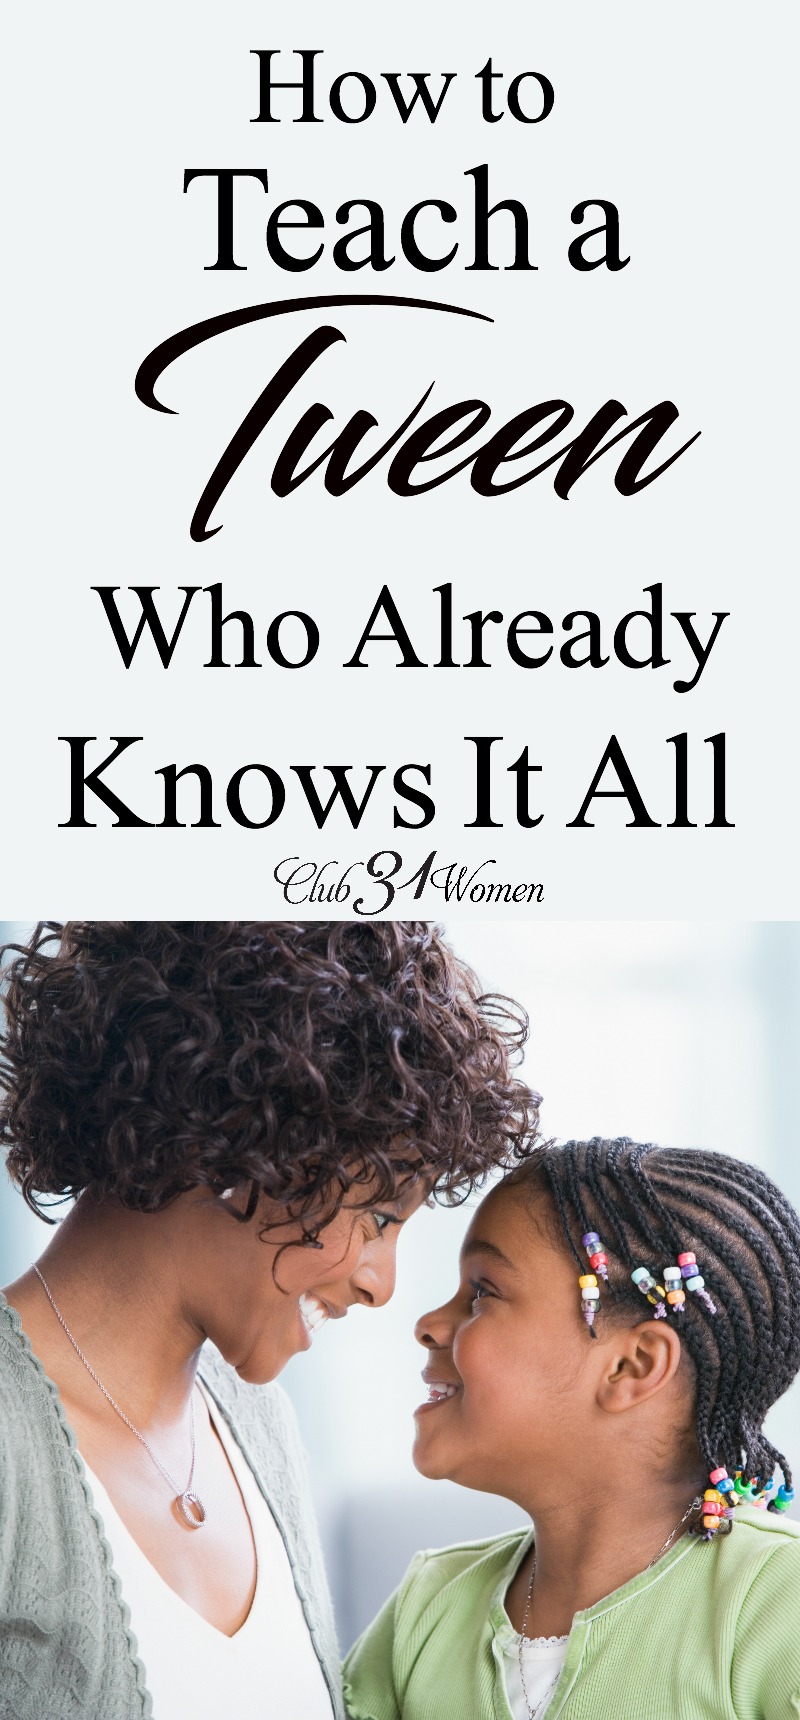 So how do you handle giving your growing tween what she needs - regardless of what you know? Here are 4 excellent tips to help you daily.... via @Club31Women